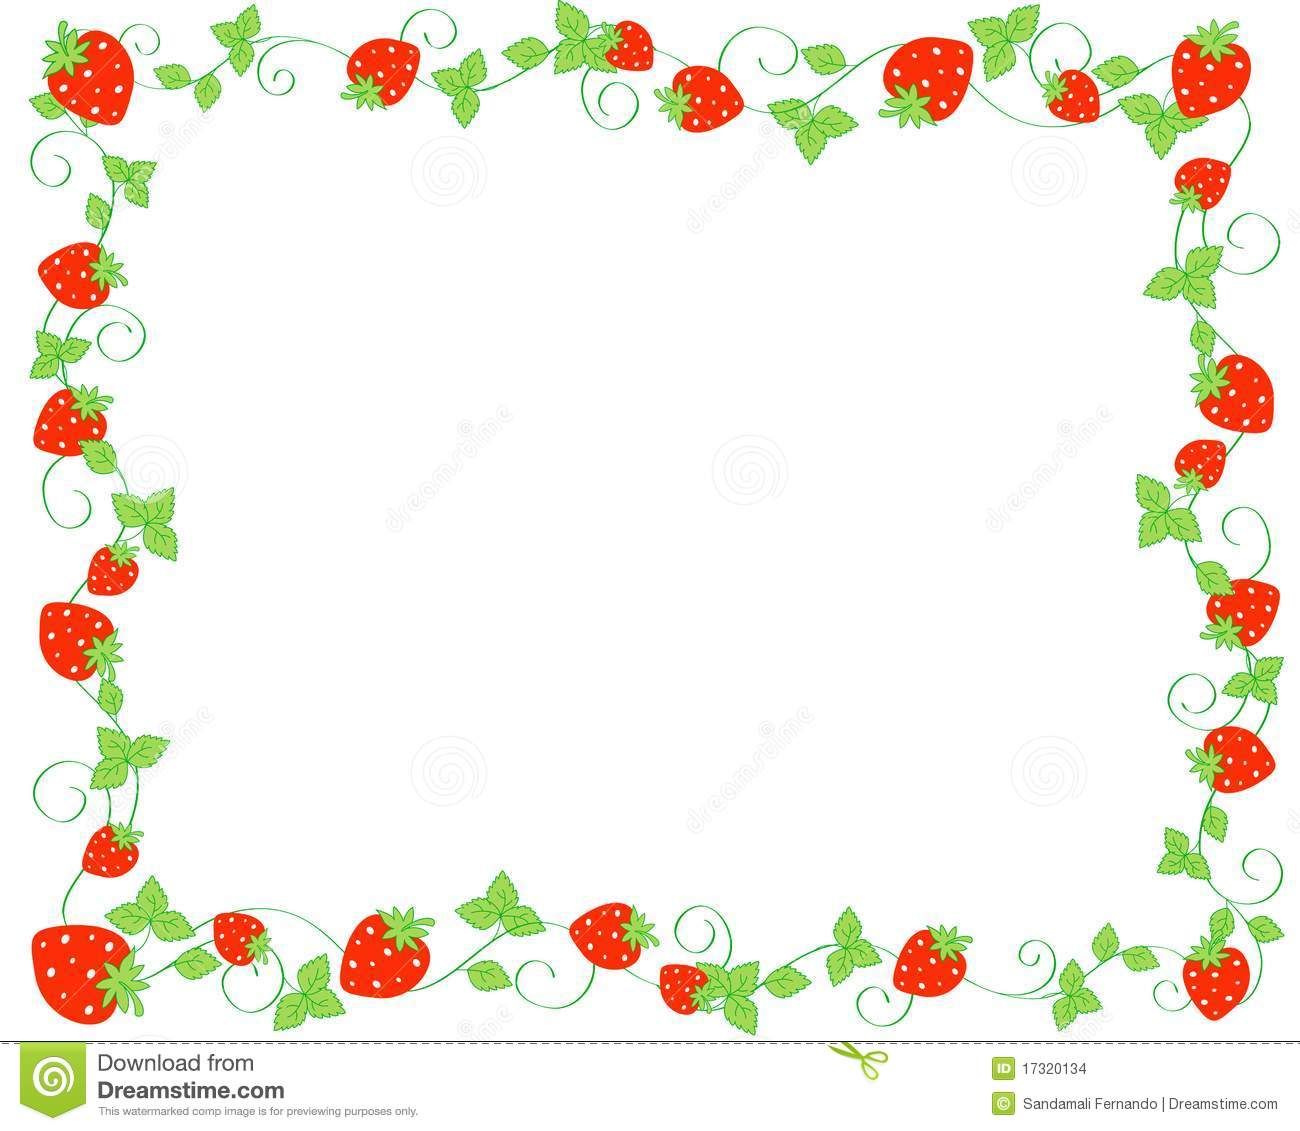 Strawberry images clip art